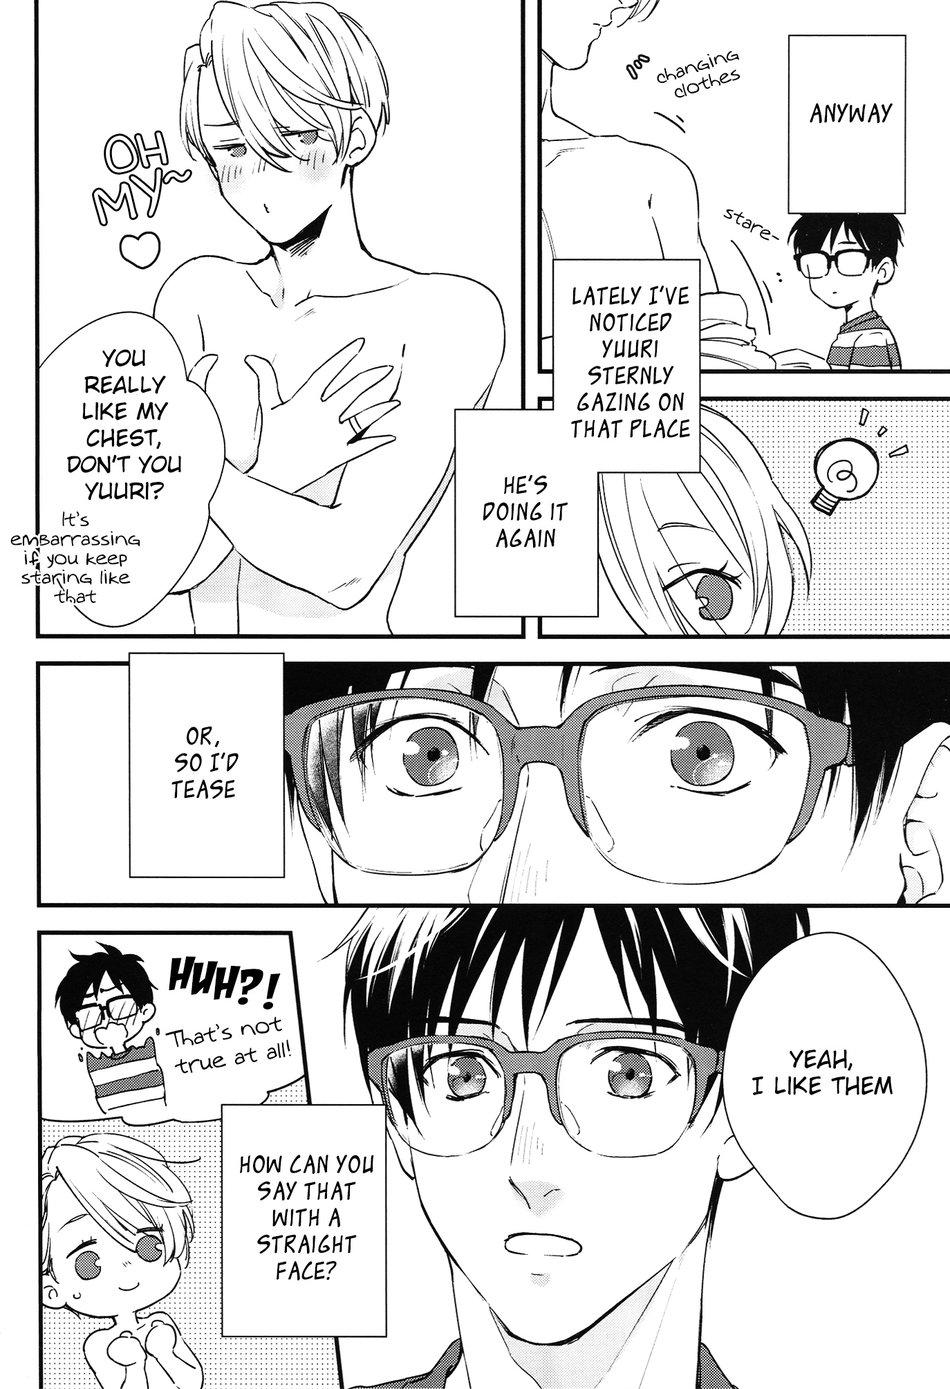 Her Love Me, Touch Me - Yuri on ice Free 18 Year Old Porn - Page 8